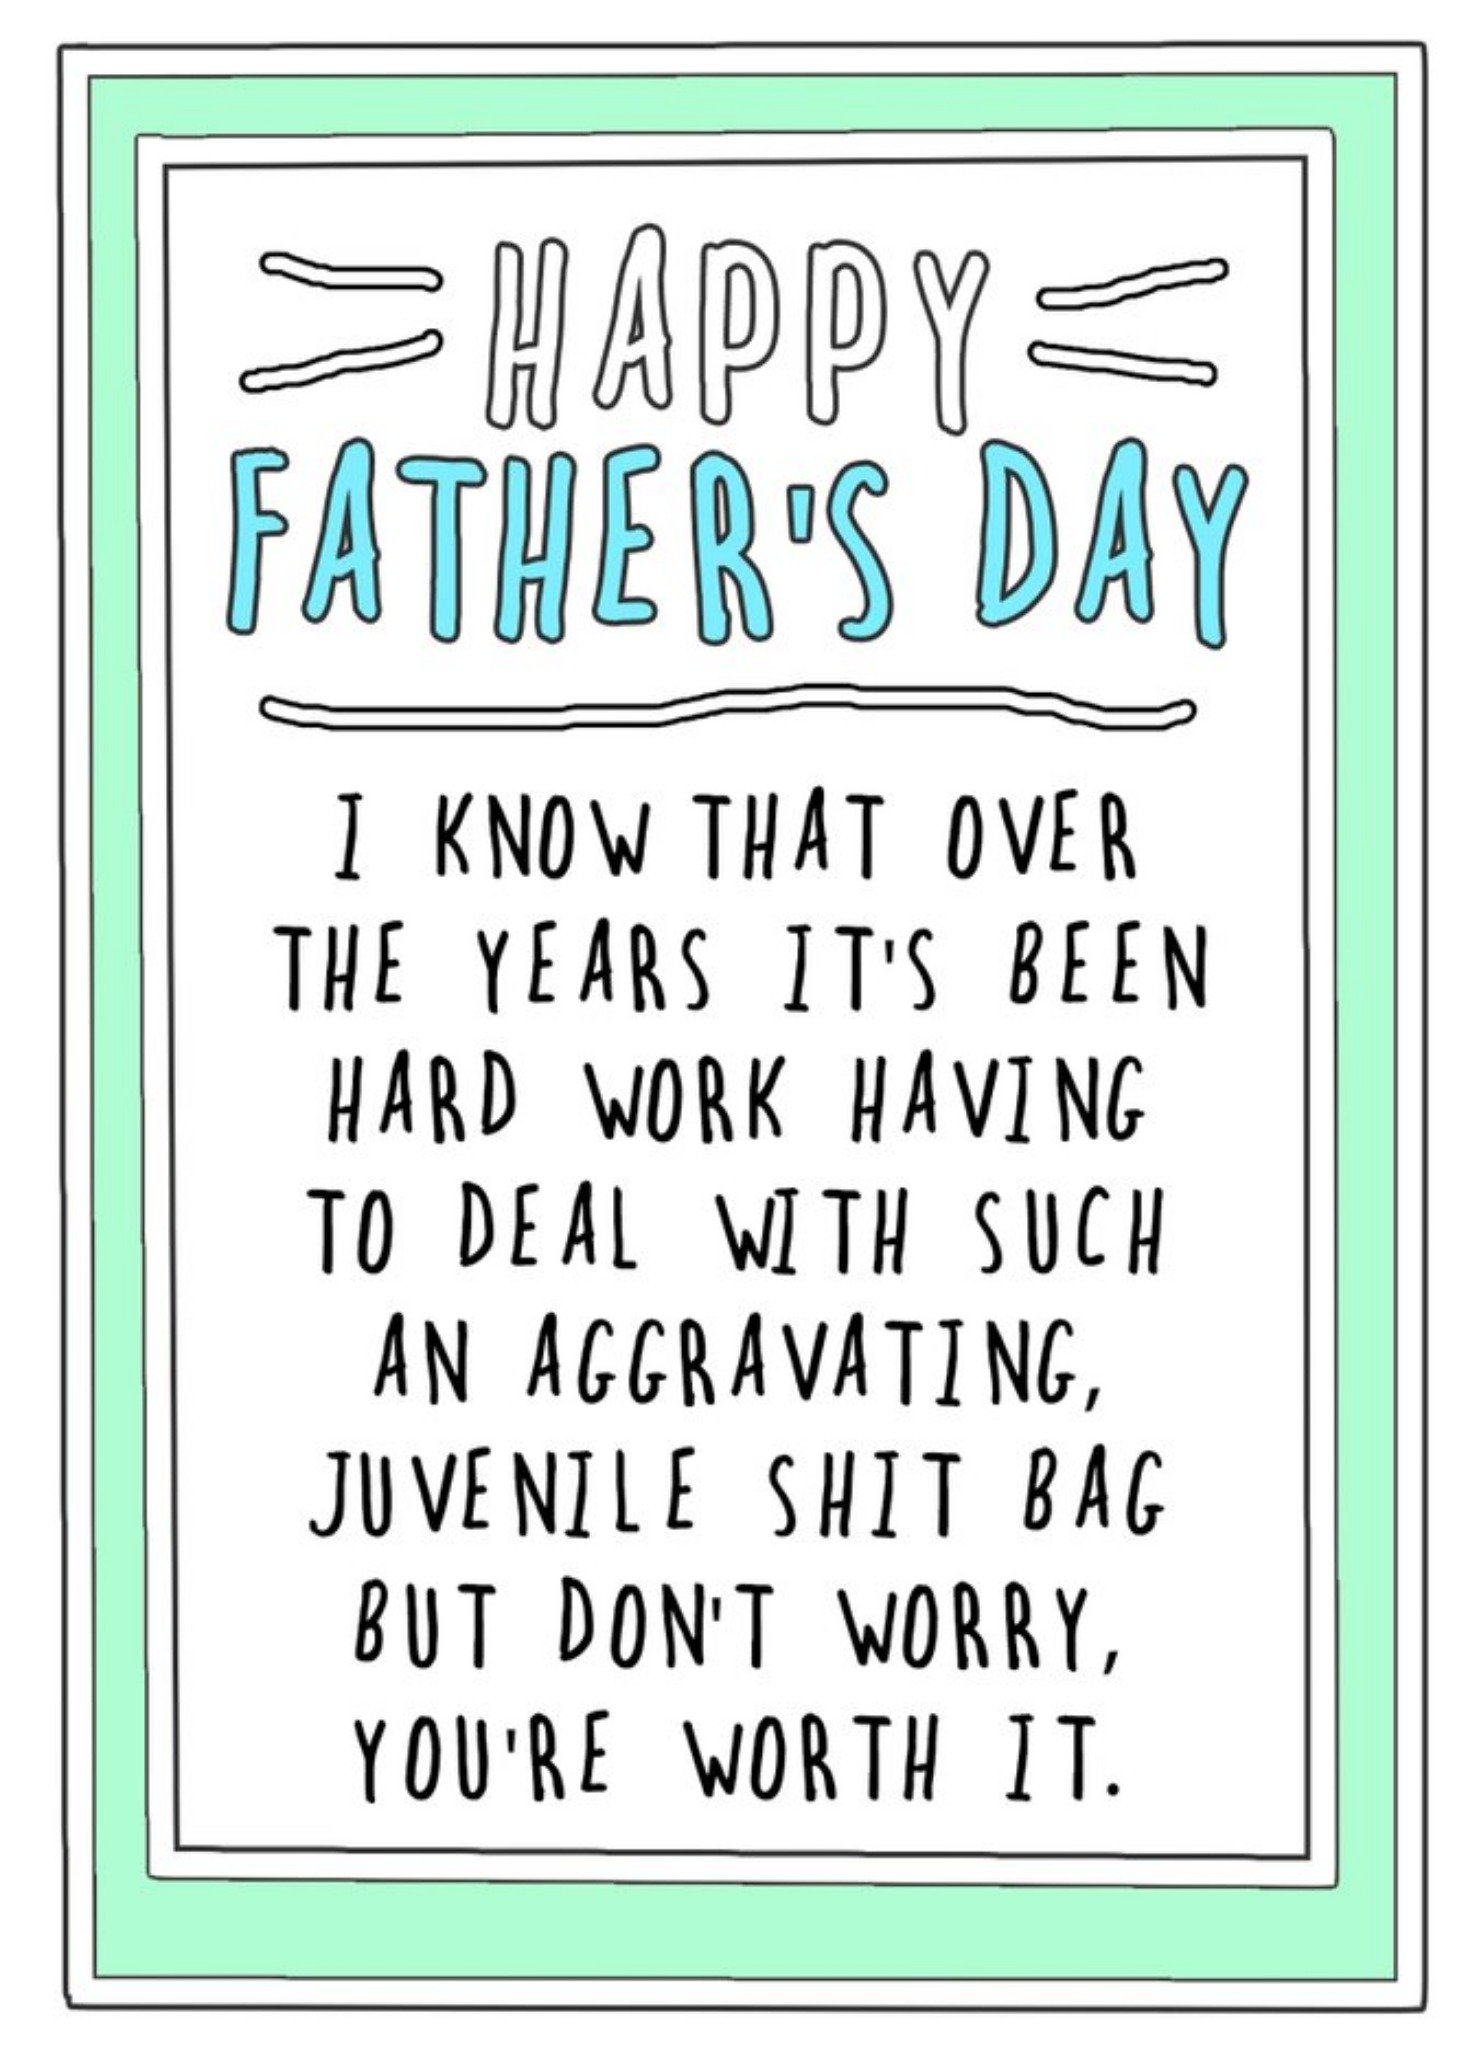 Go La La Funny Rude Over The Years It's Been Hard Work Father's Day Card Ecard